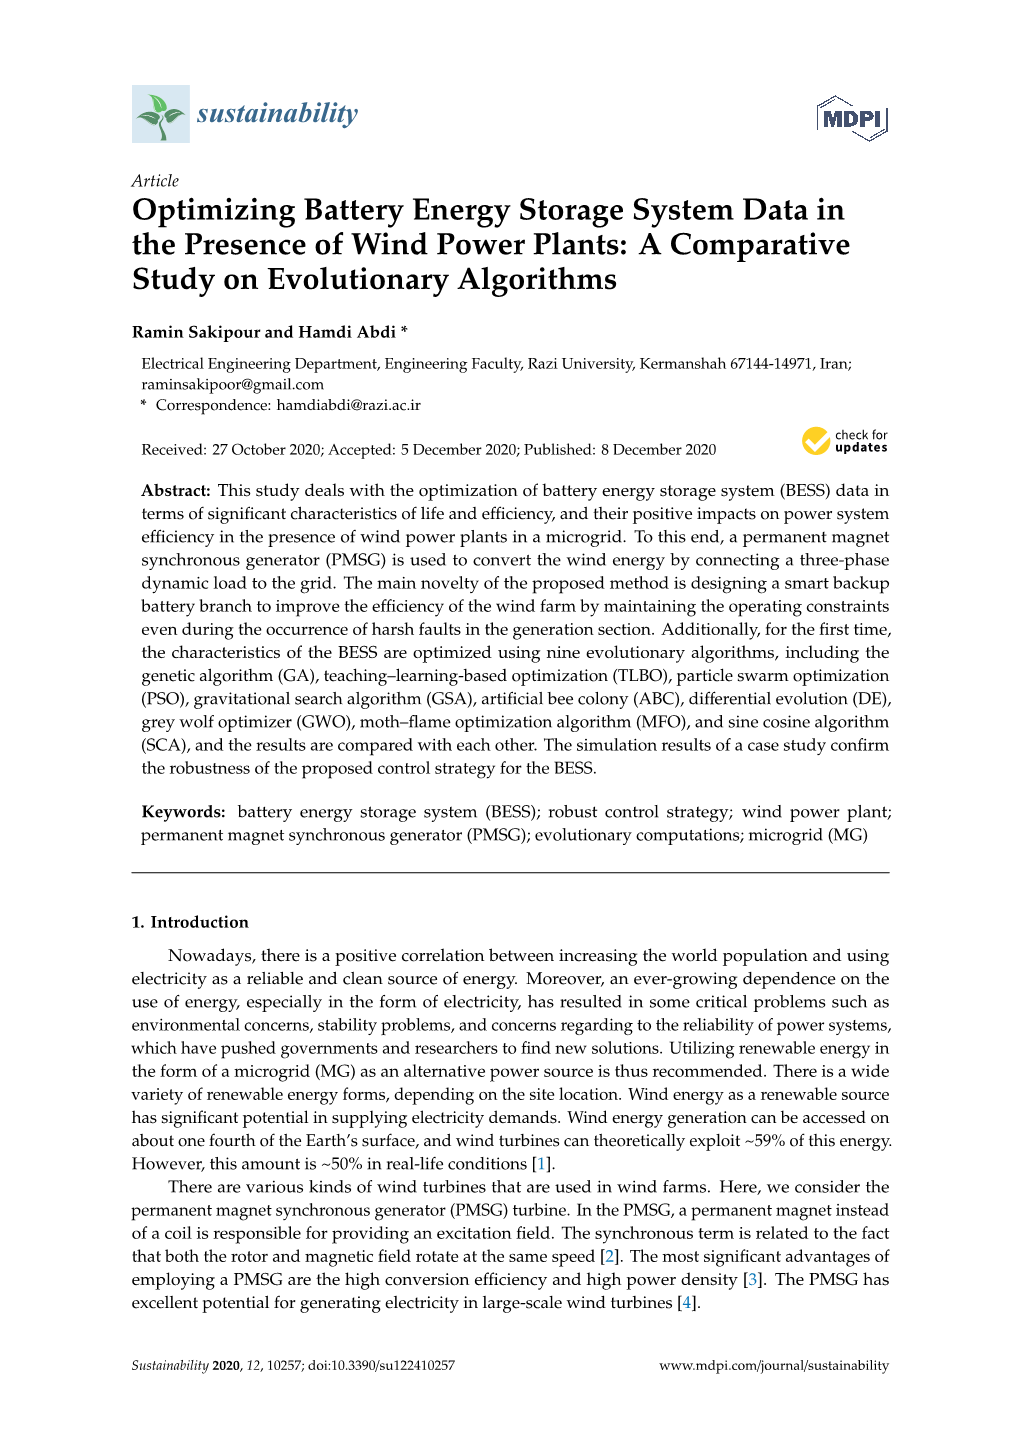 Optimizing Battery Energy Storage System Data in the Presence of Wind Power Plants: a Comparative Study on Evolutionary Algorithms